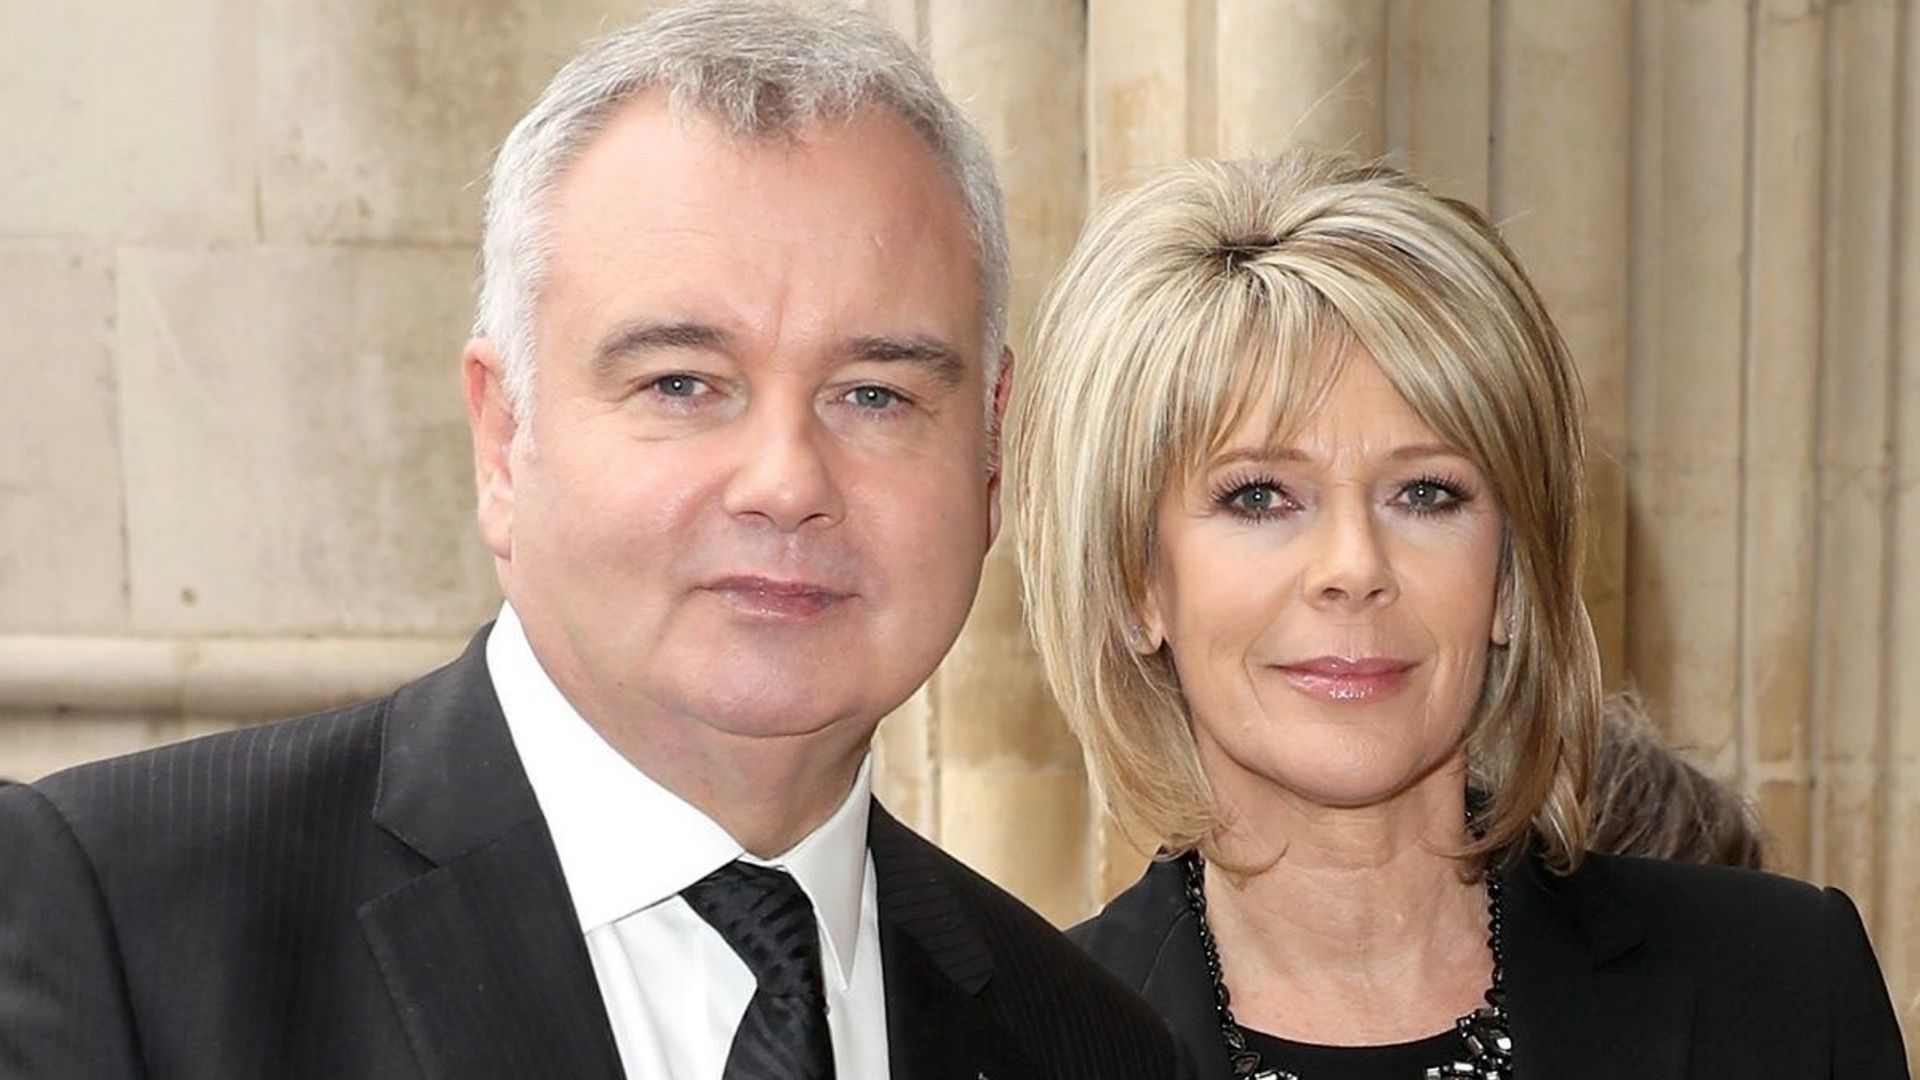 Eamonn Holmes breaks silence after defending Ruth Langsford following Phillip Schofield 'snub'